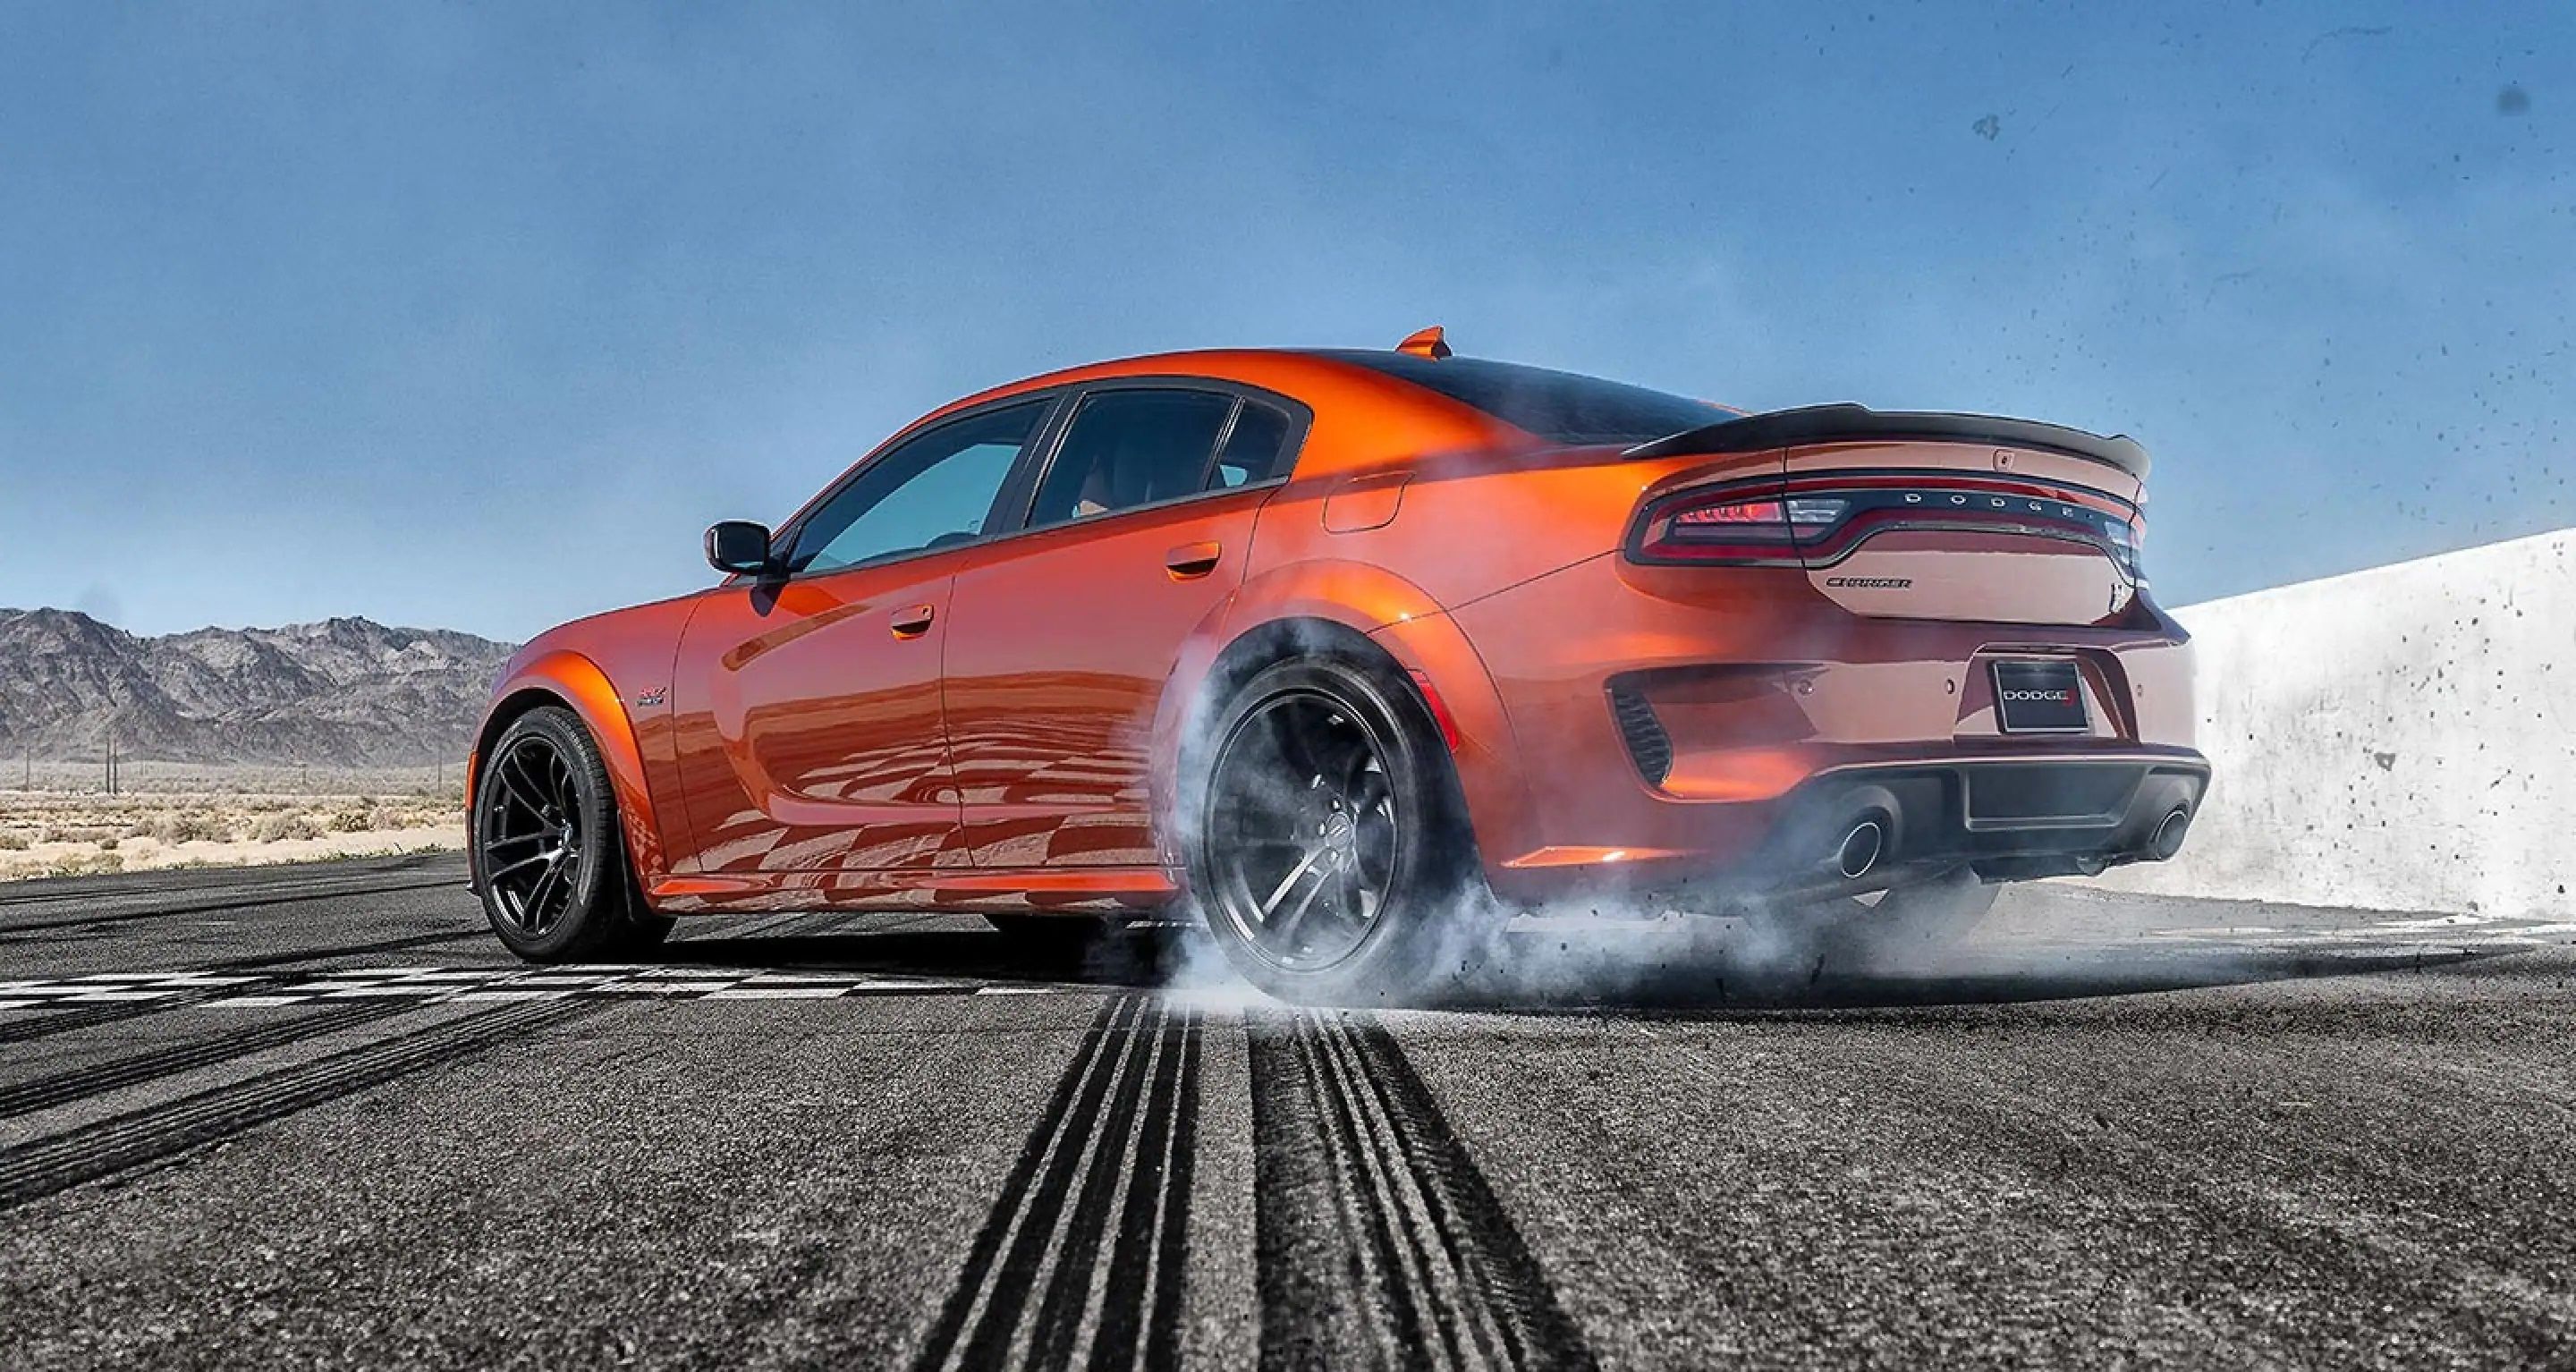 The 2022 Dodge Charger SRT Hellcat Redeye Widebody rear end. 